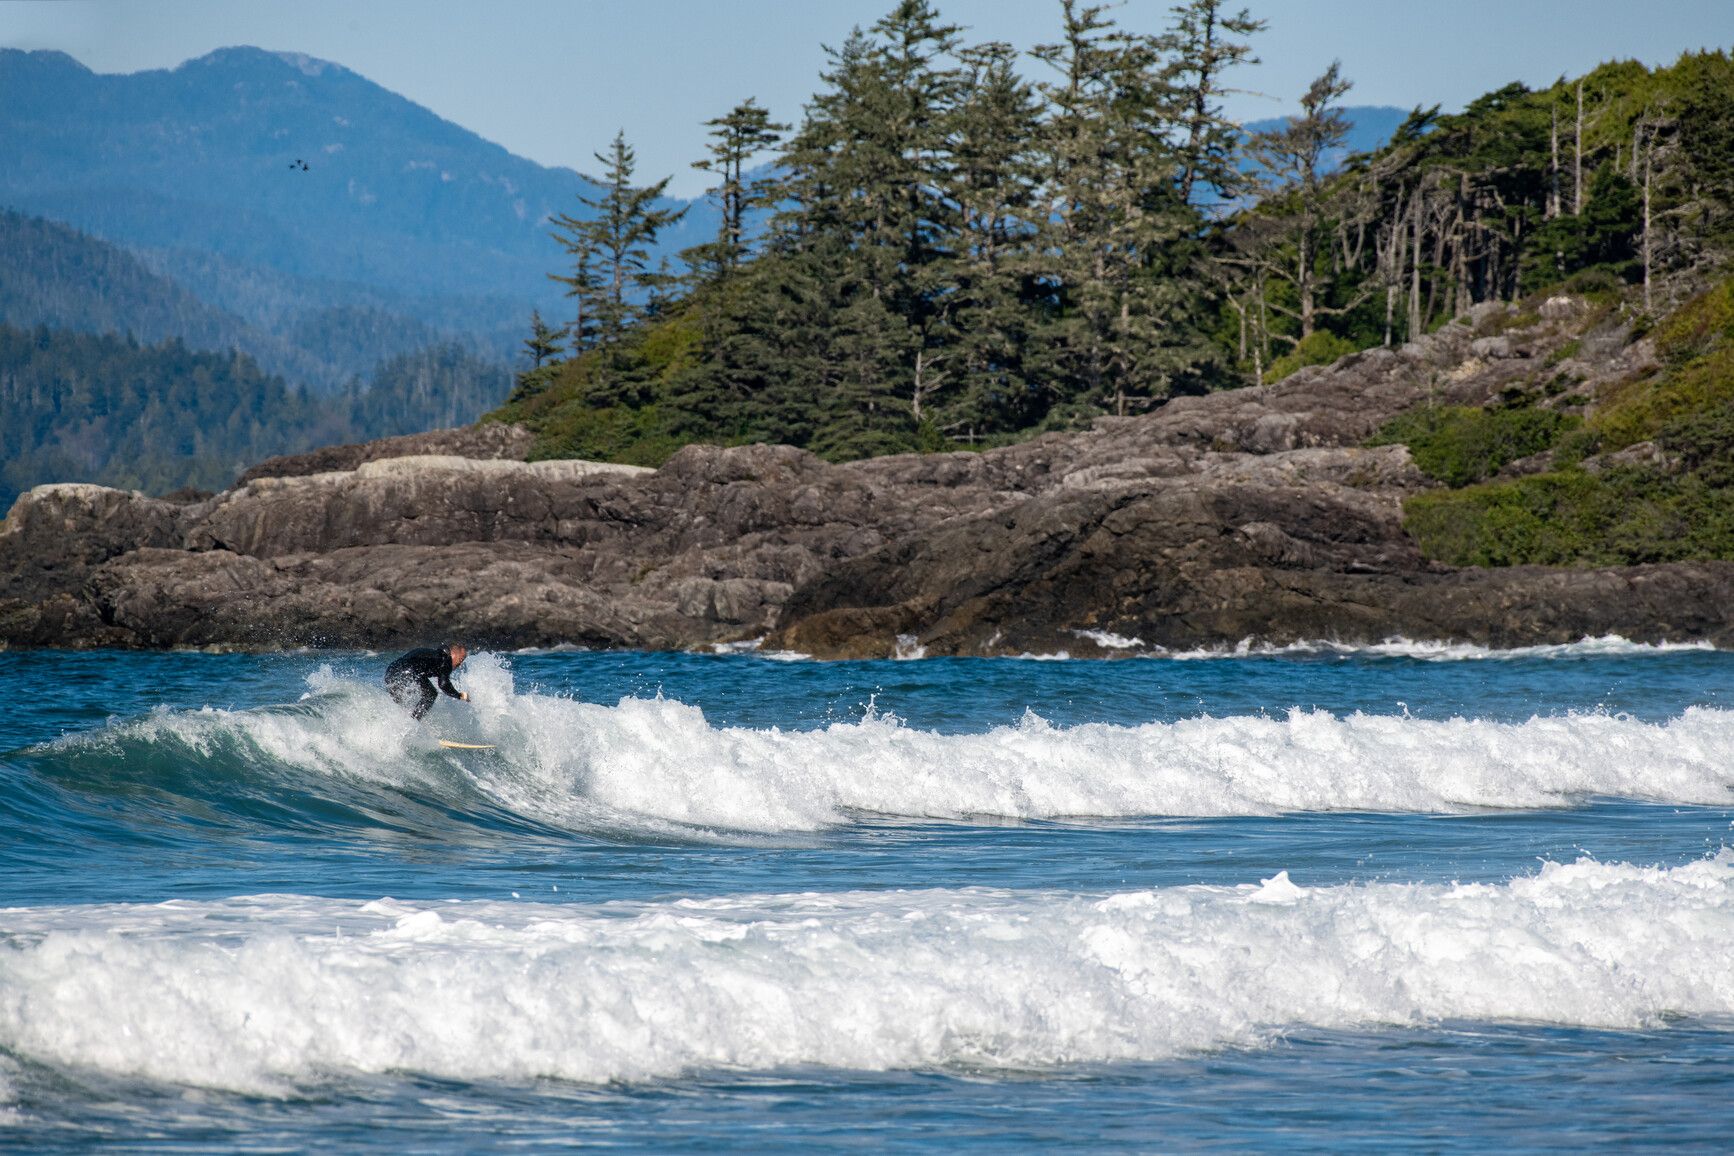 A surfer catches a wave on the ocean just off Vargas Island Park.